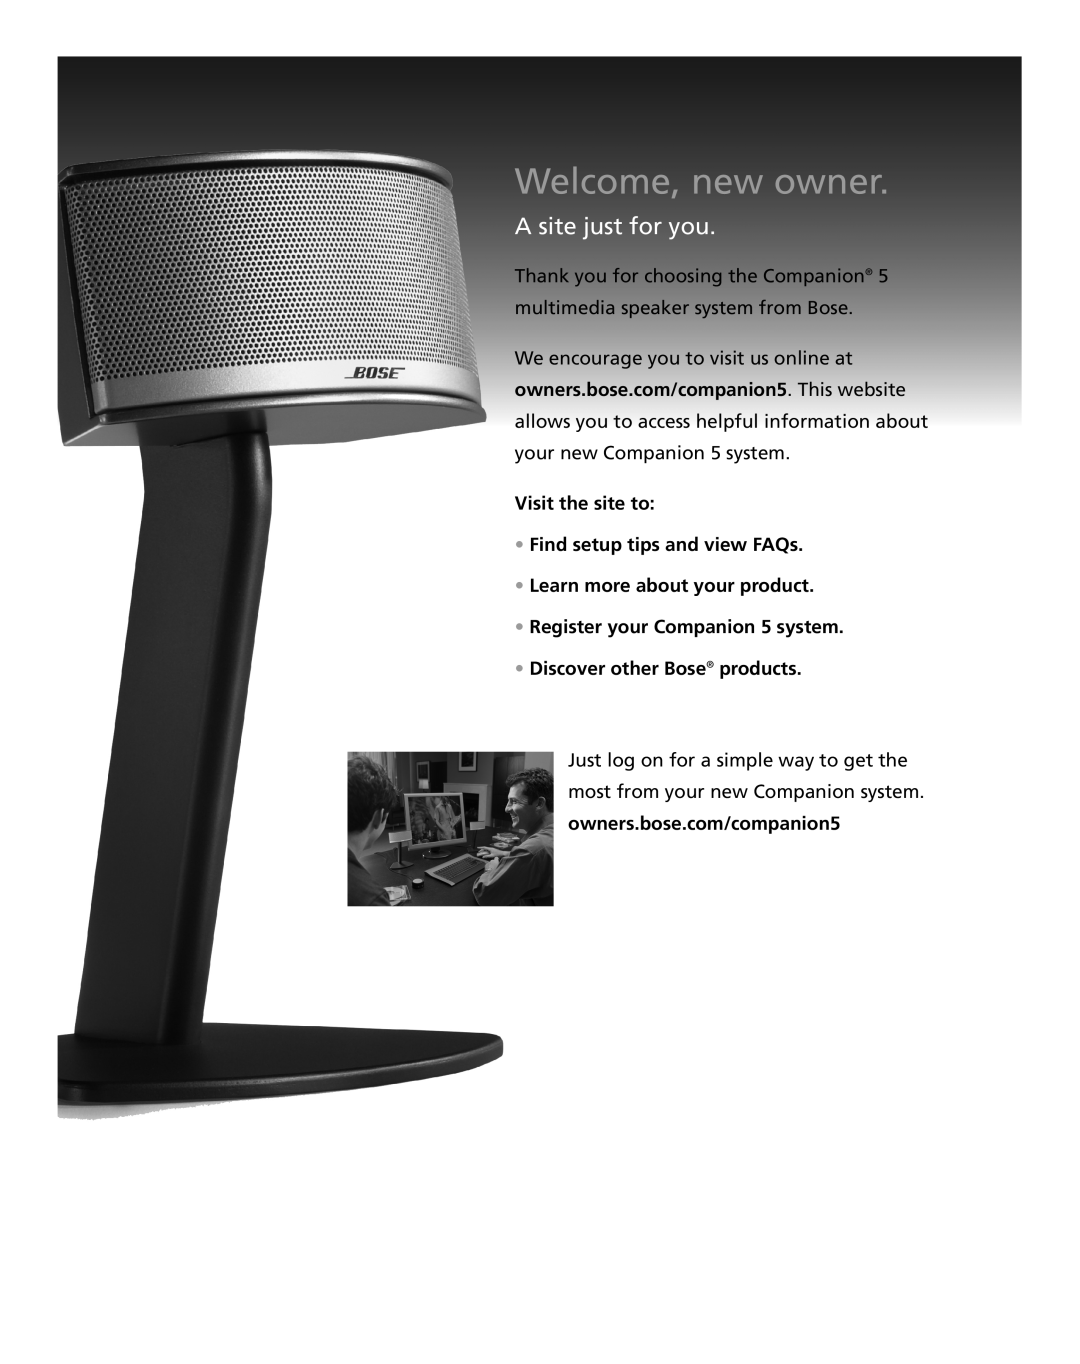 Bose Companion 5 manual Visit the site to Find setup tips and view FAQs, Learn more about your product, Welcome, new owner 